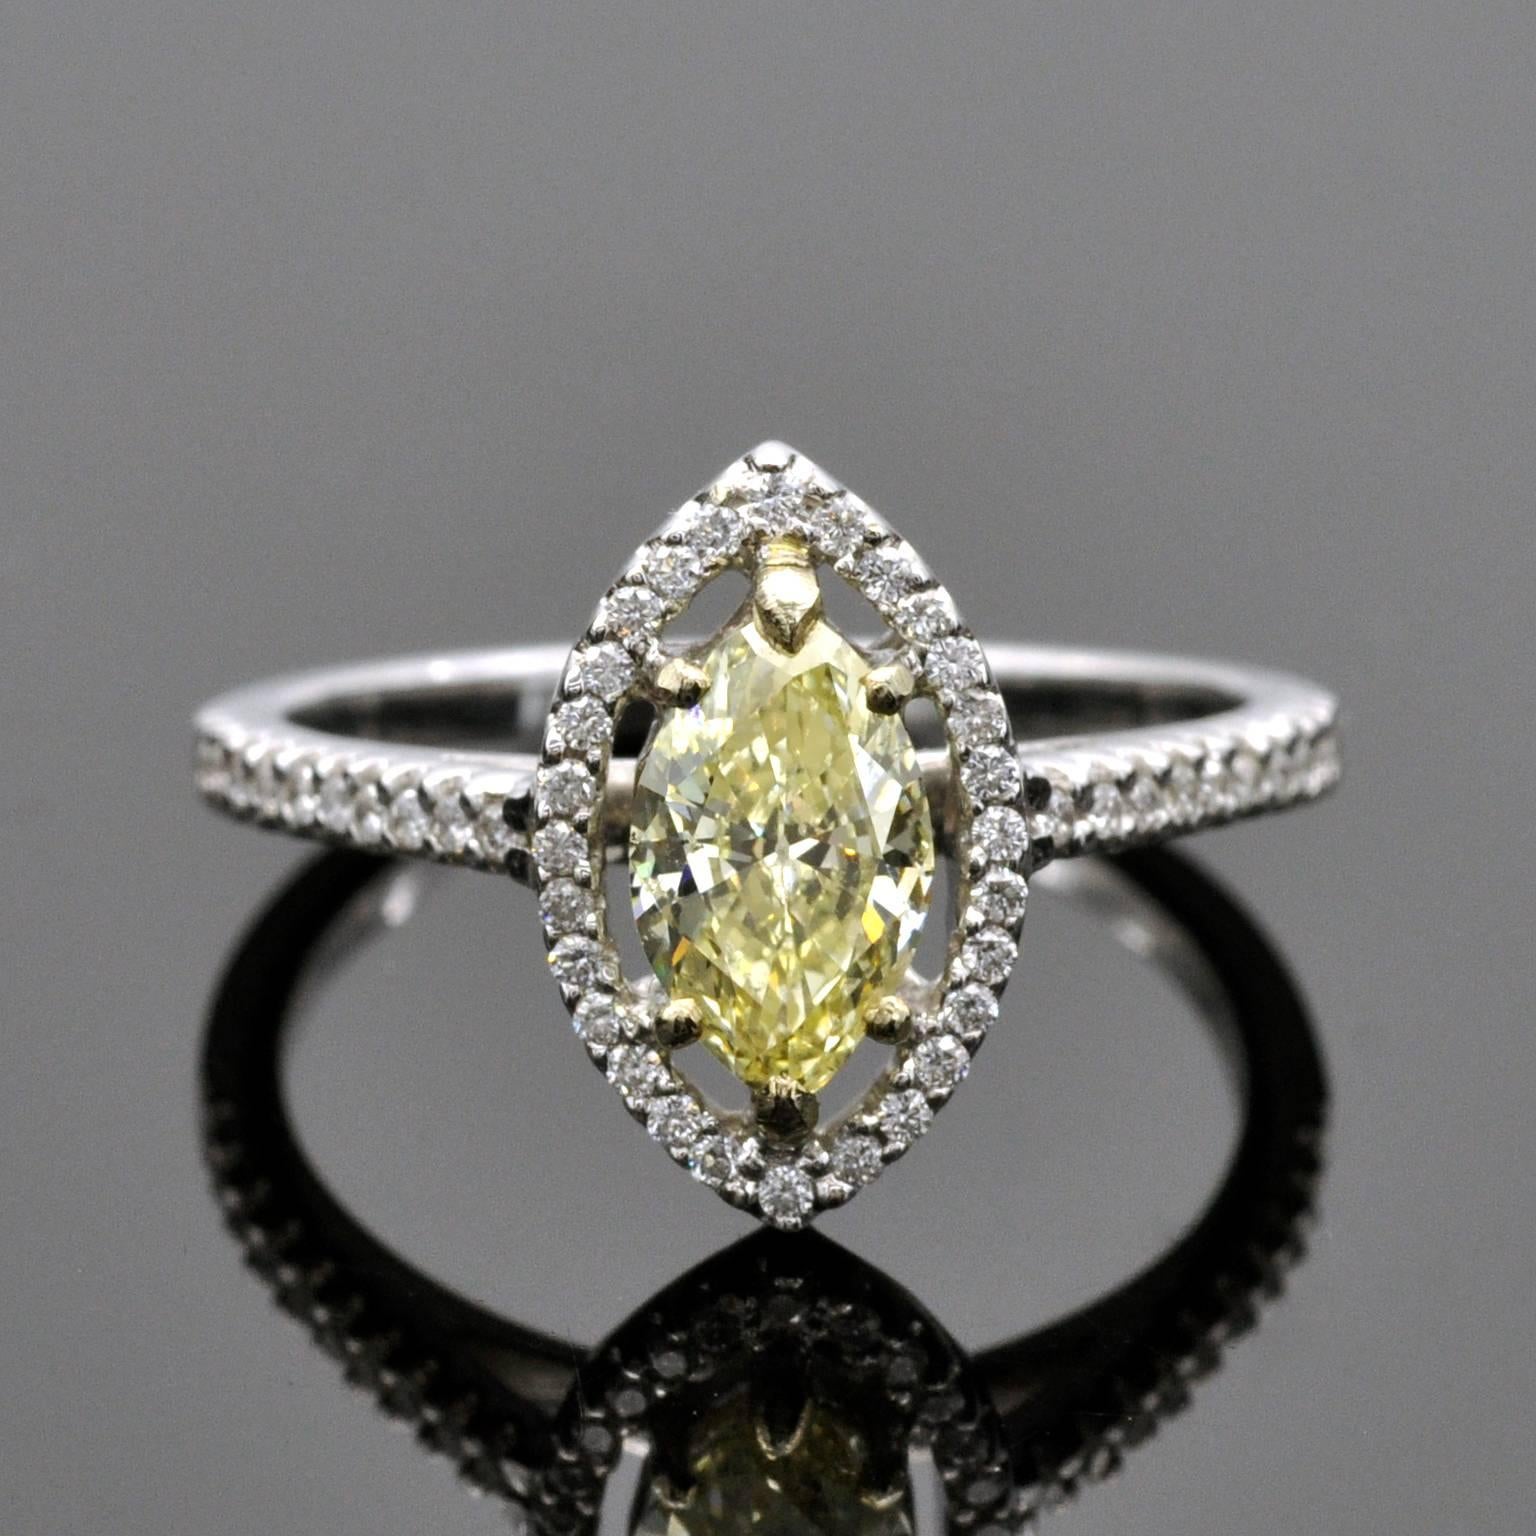 The center diamond, a 0.79 carat fancy yellow marquise cut diamond, set in an timeless 18KT white gold halo ring, comes with a certificate from the esteemed HRD lab in Belgium.
The ring is in mint state and has never been worn. it comes in a Claris